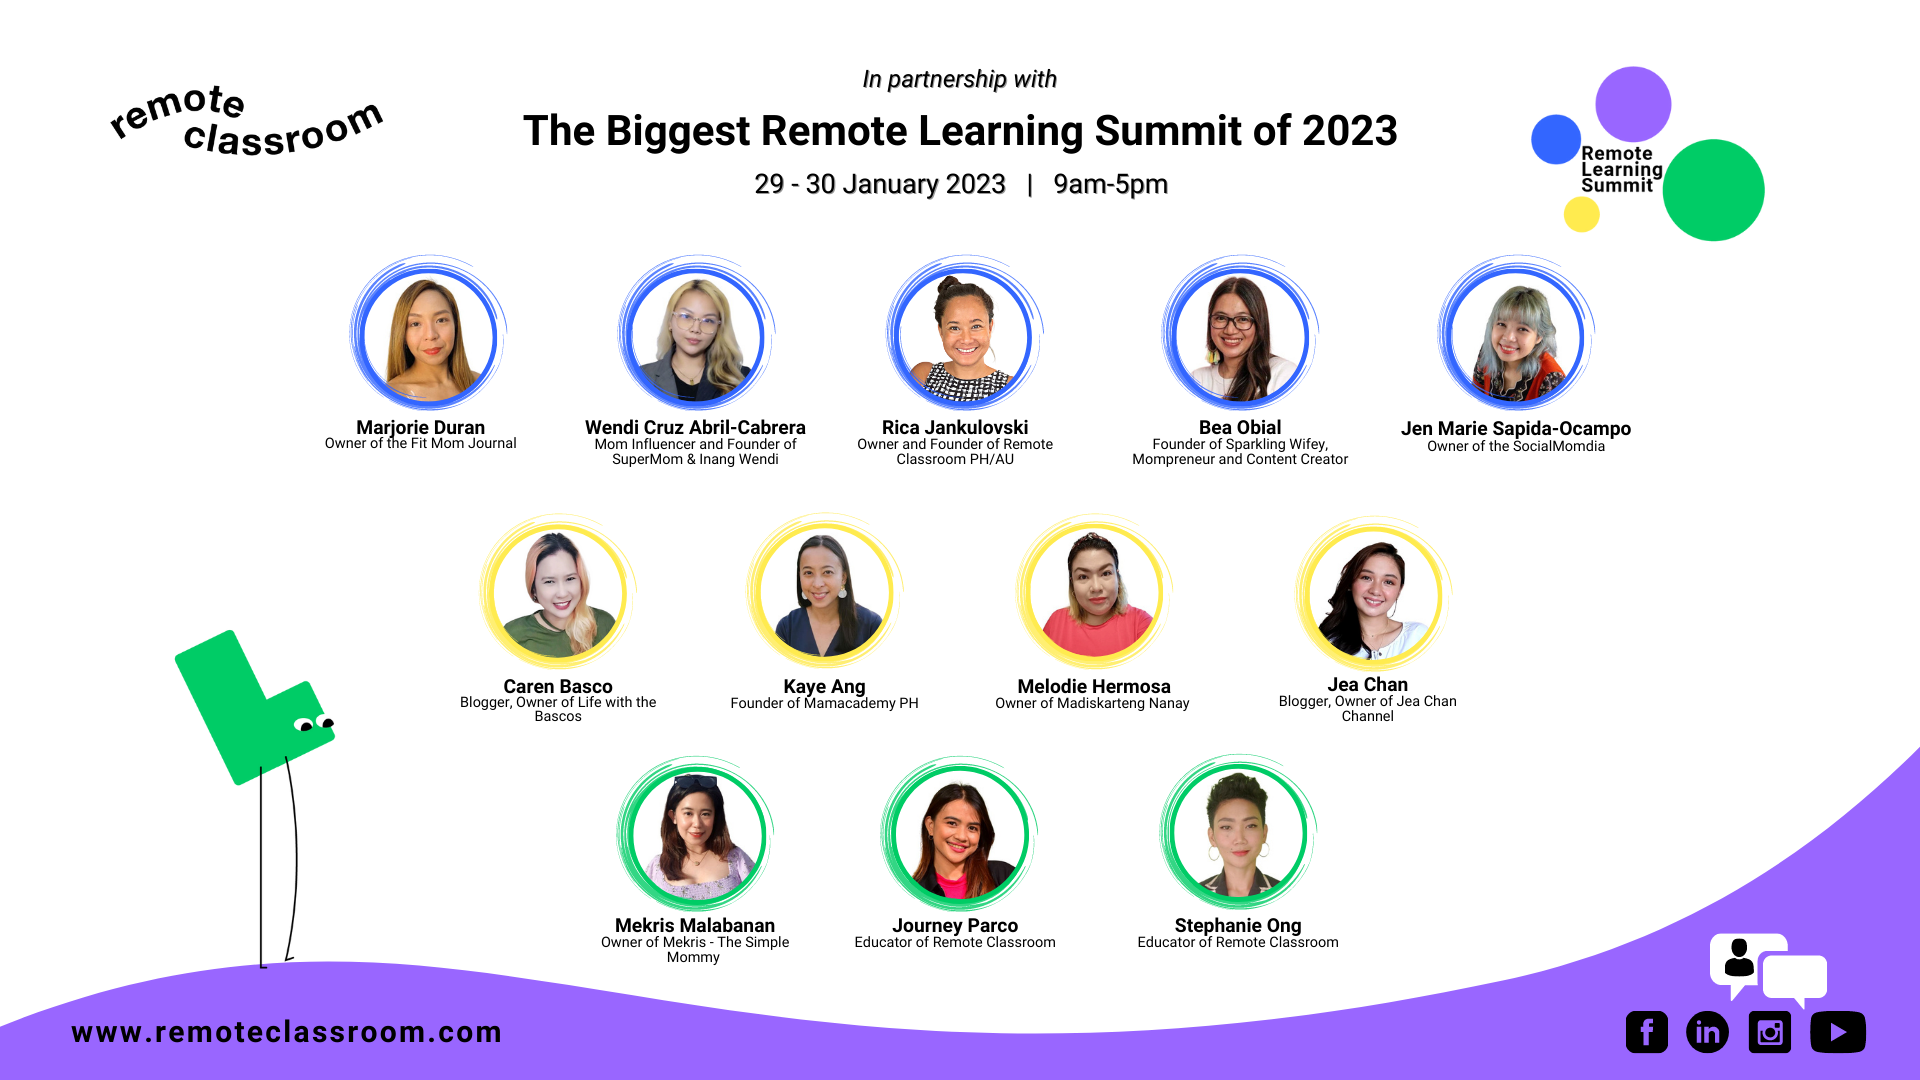 The roster of speakers empower parents, learners, and online educators to strengthen the Remote Learning Community.